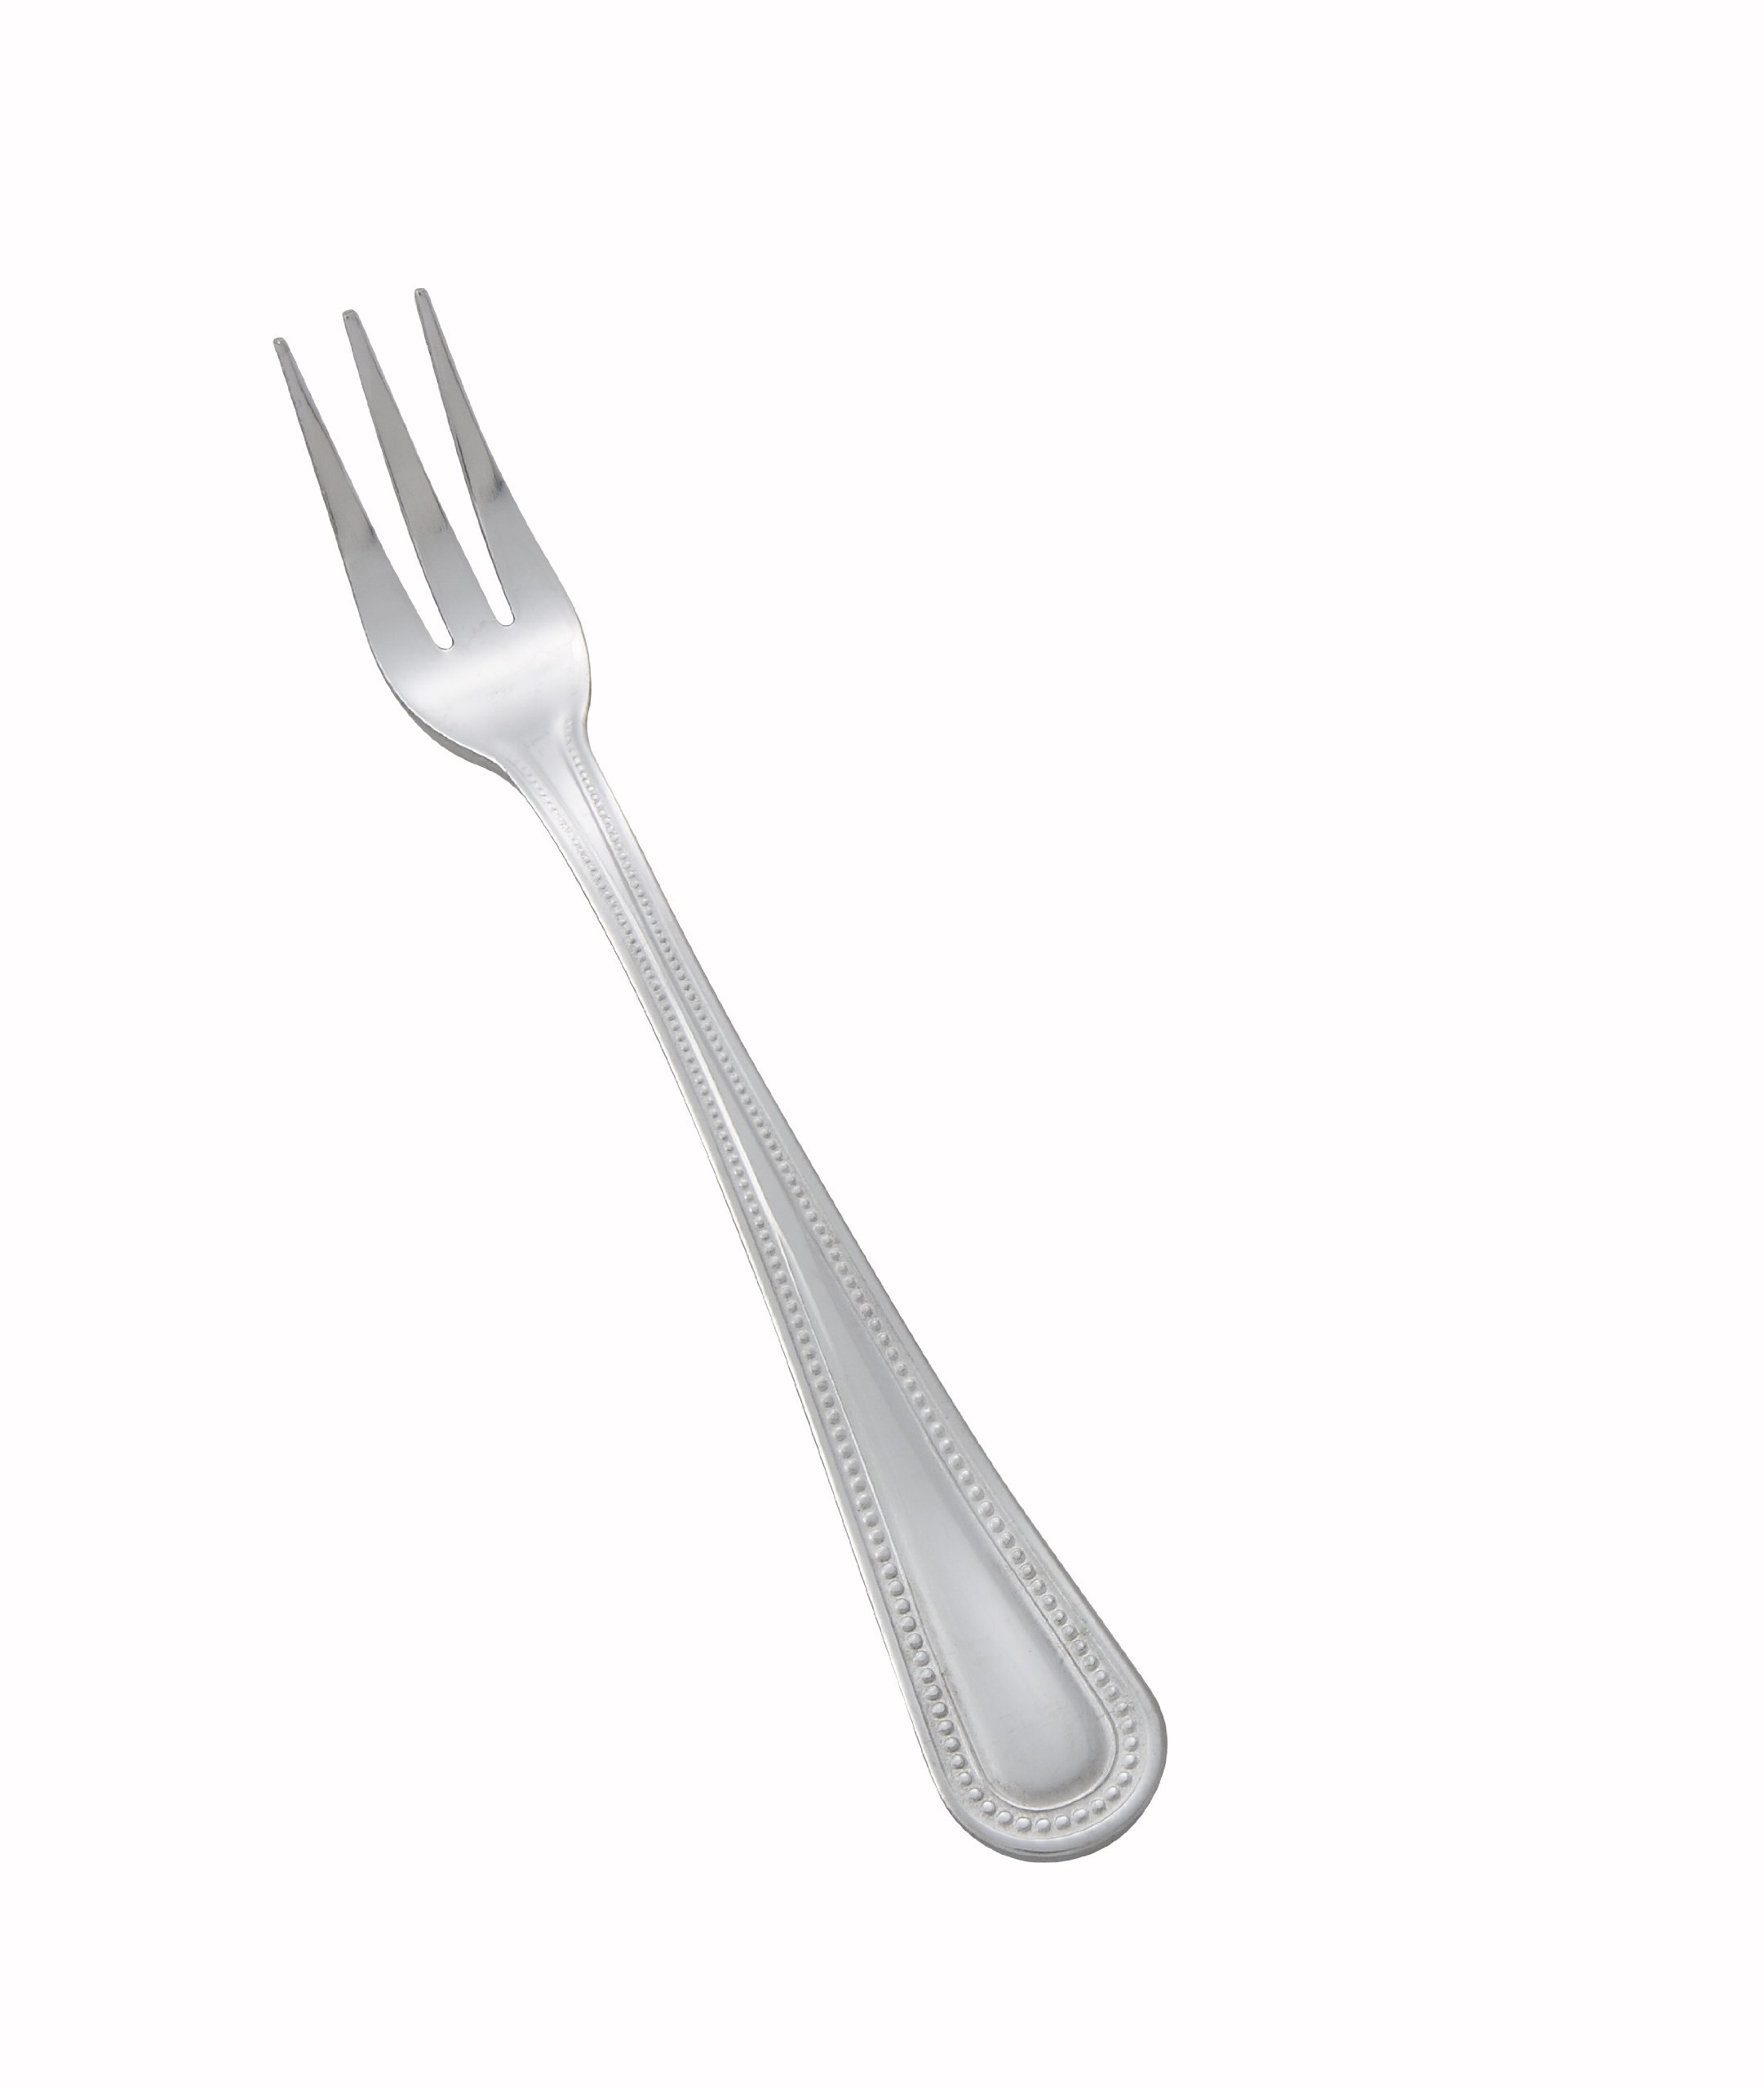 Winco 12-Piece Dots Oyster Fork Set, 18-0 Stainless Steel